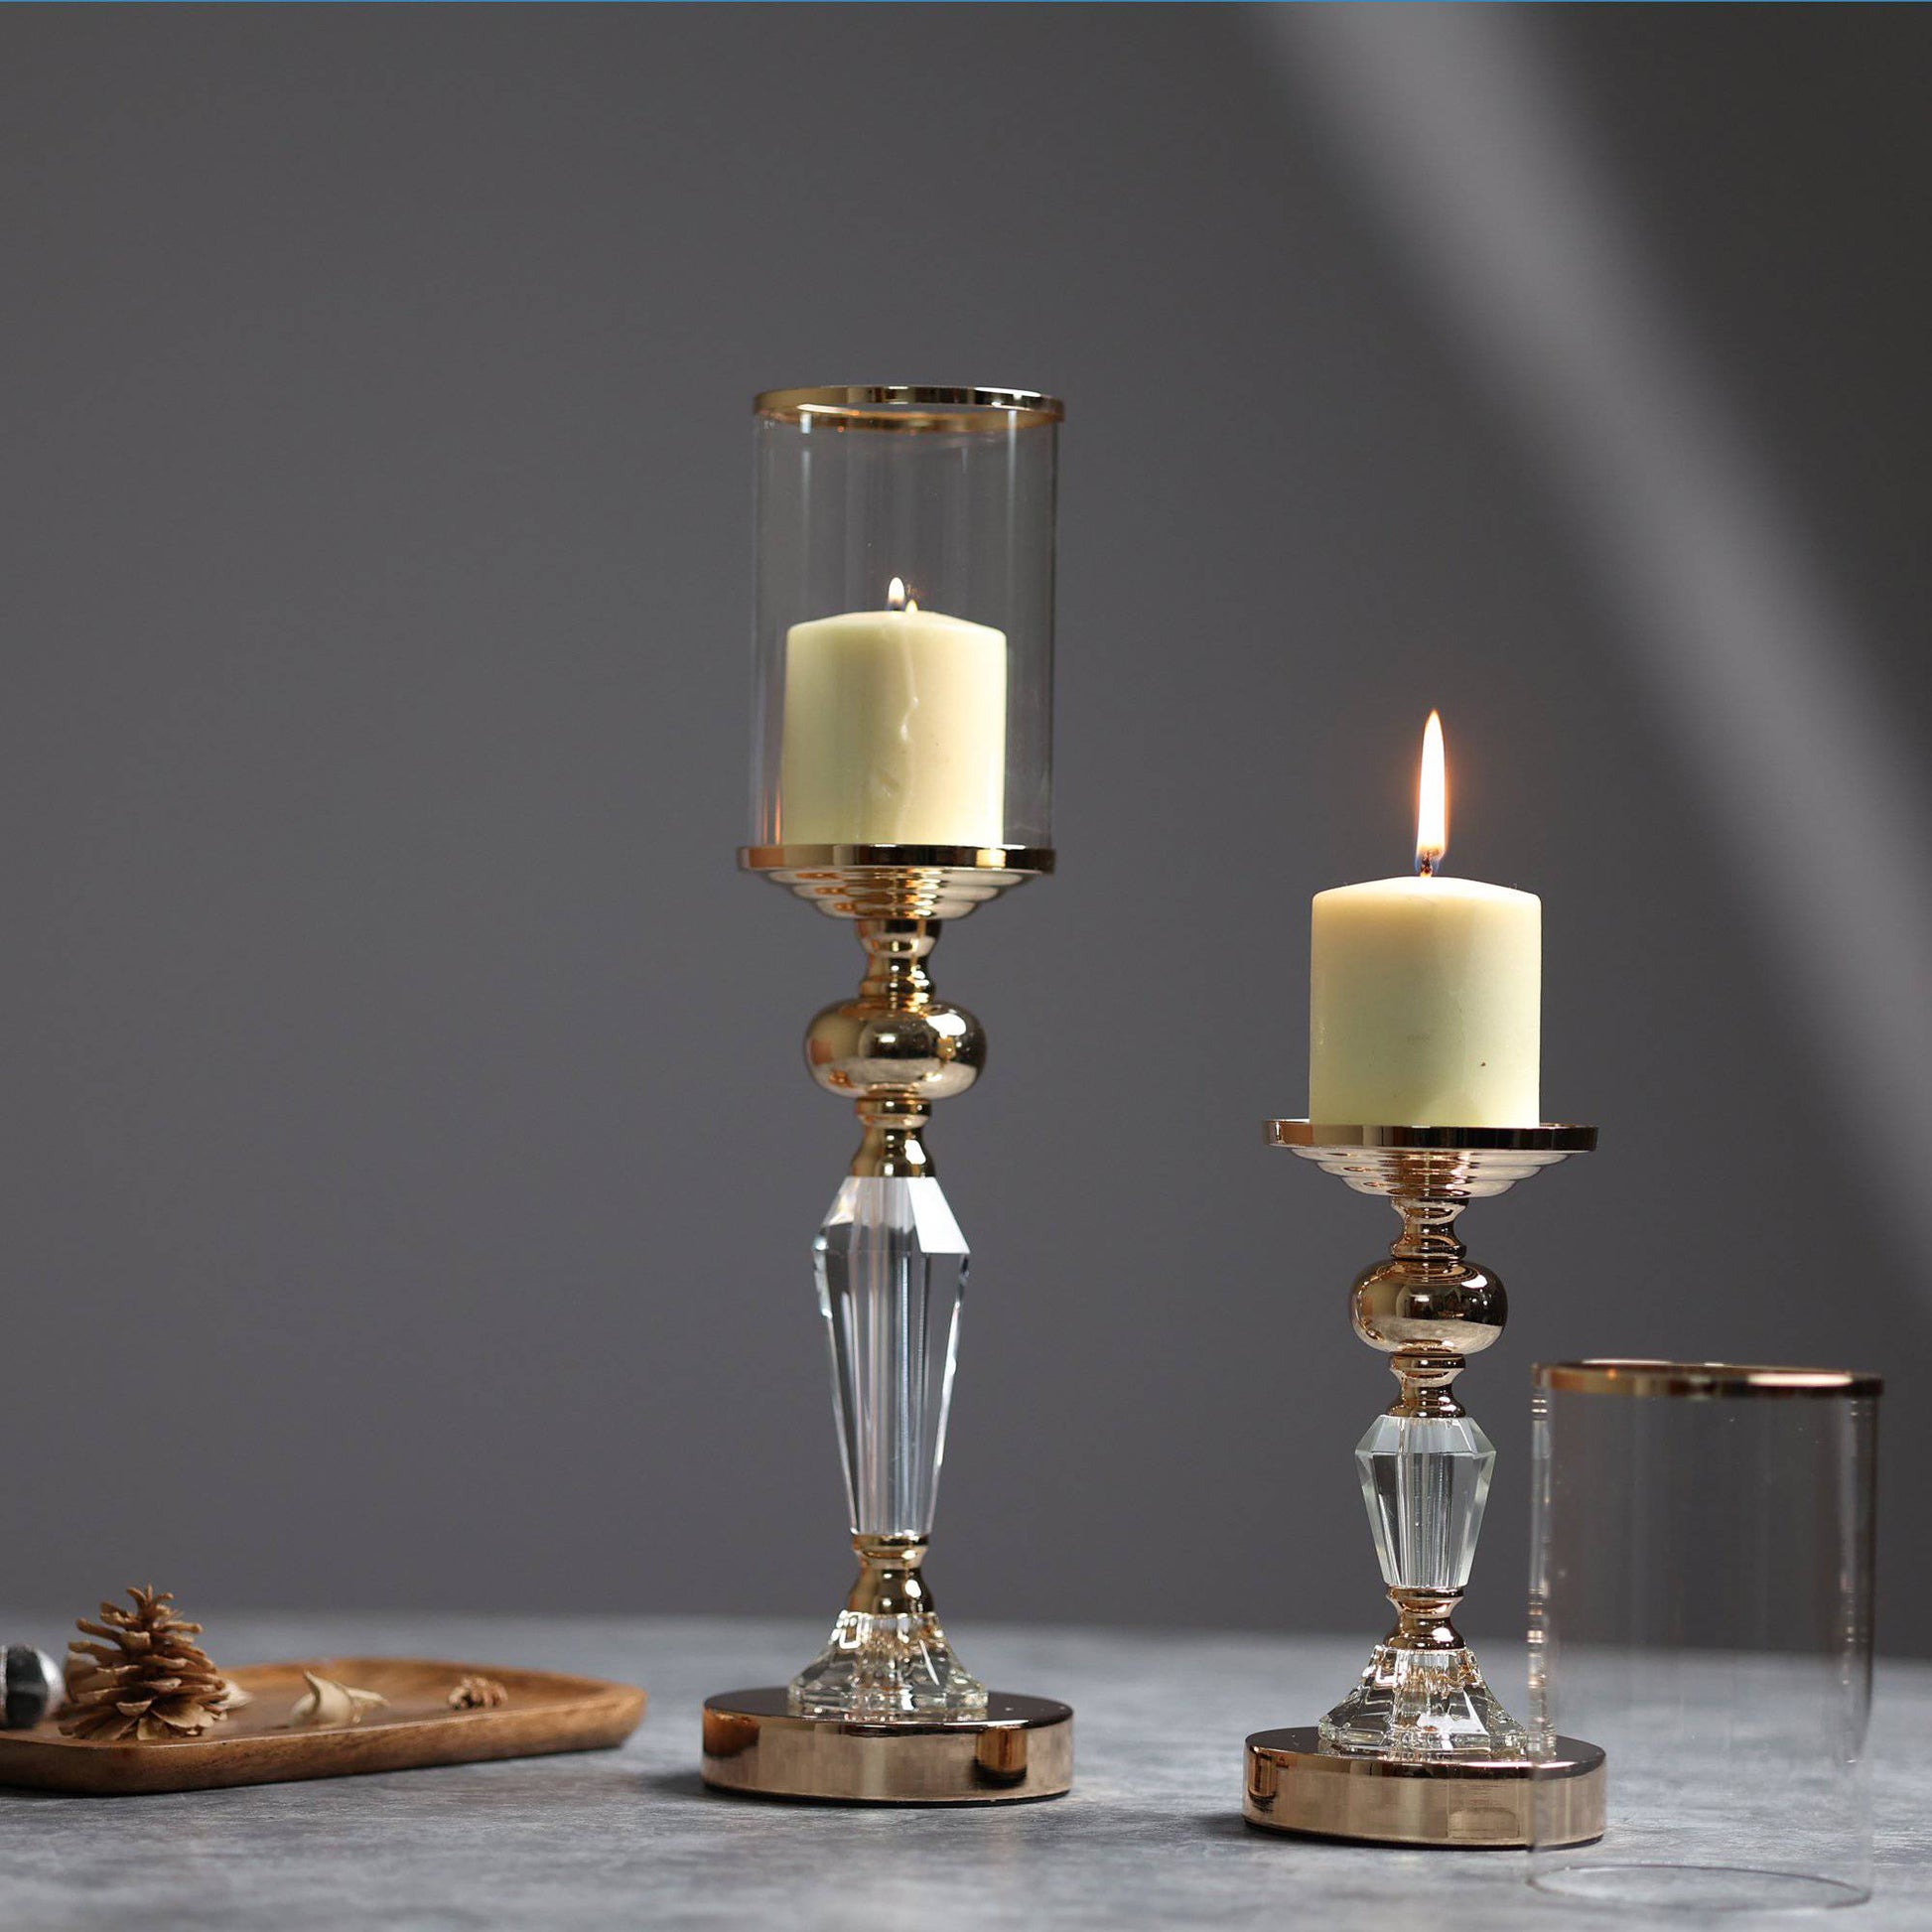 Fulgor Rose Gold Crytsal Candle Stands - The Decor Circle